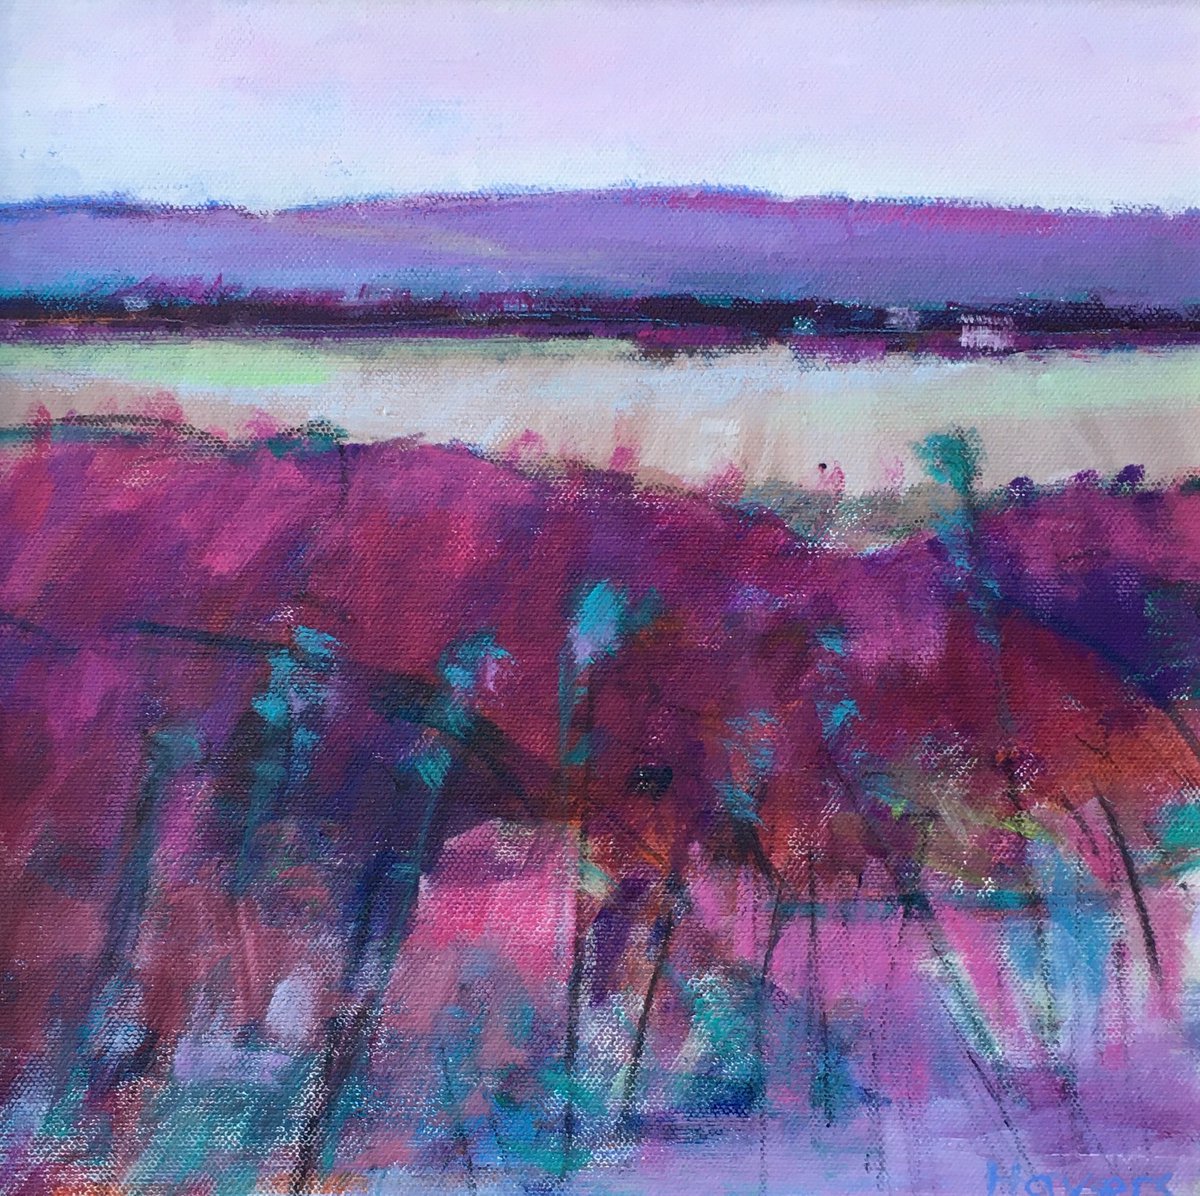 Willowherb and Grasses by Chrissie Havers